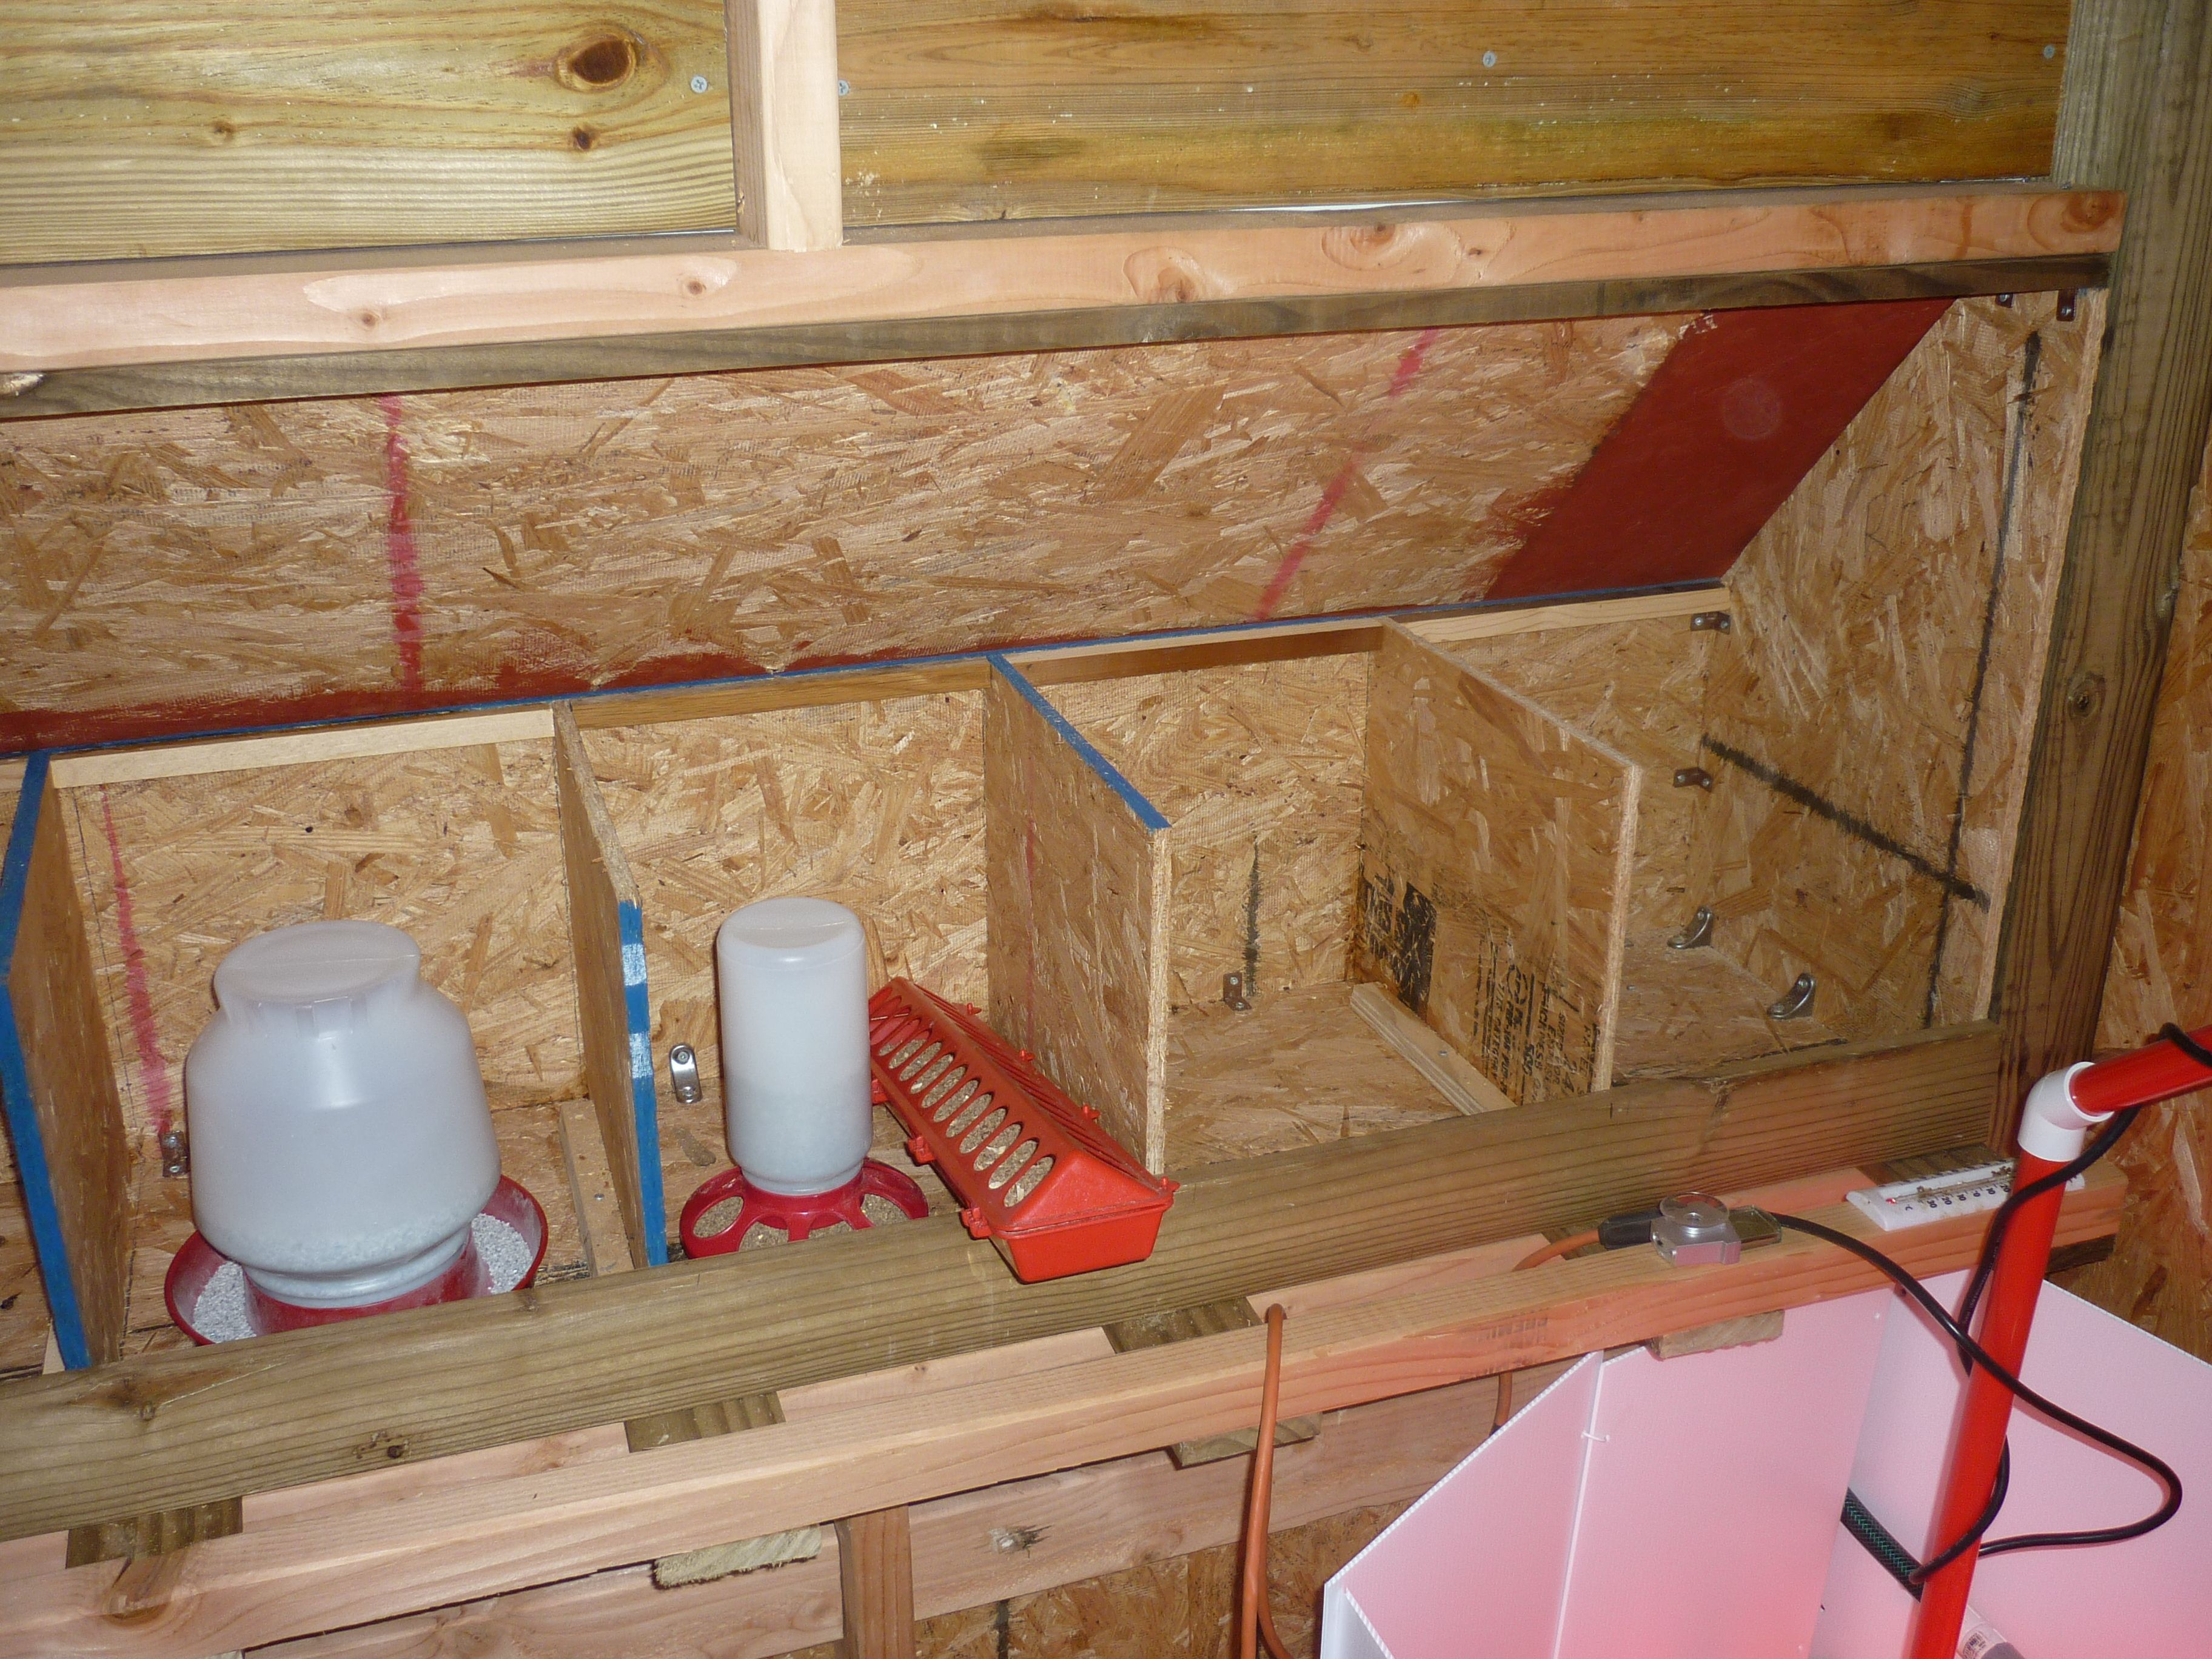 This is the view of the nesting boxes from the inside (there are five nesting boxes).